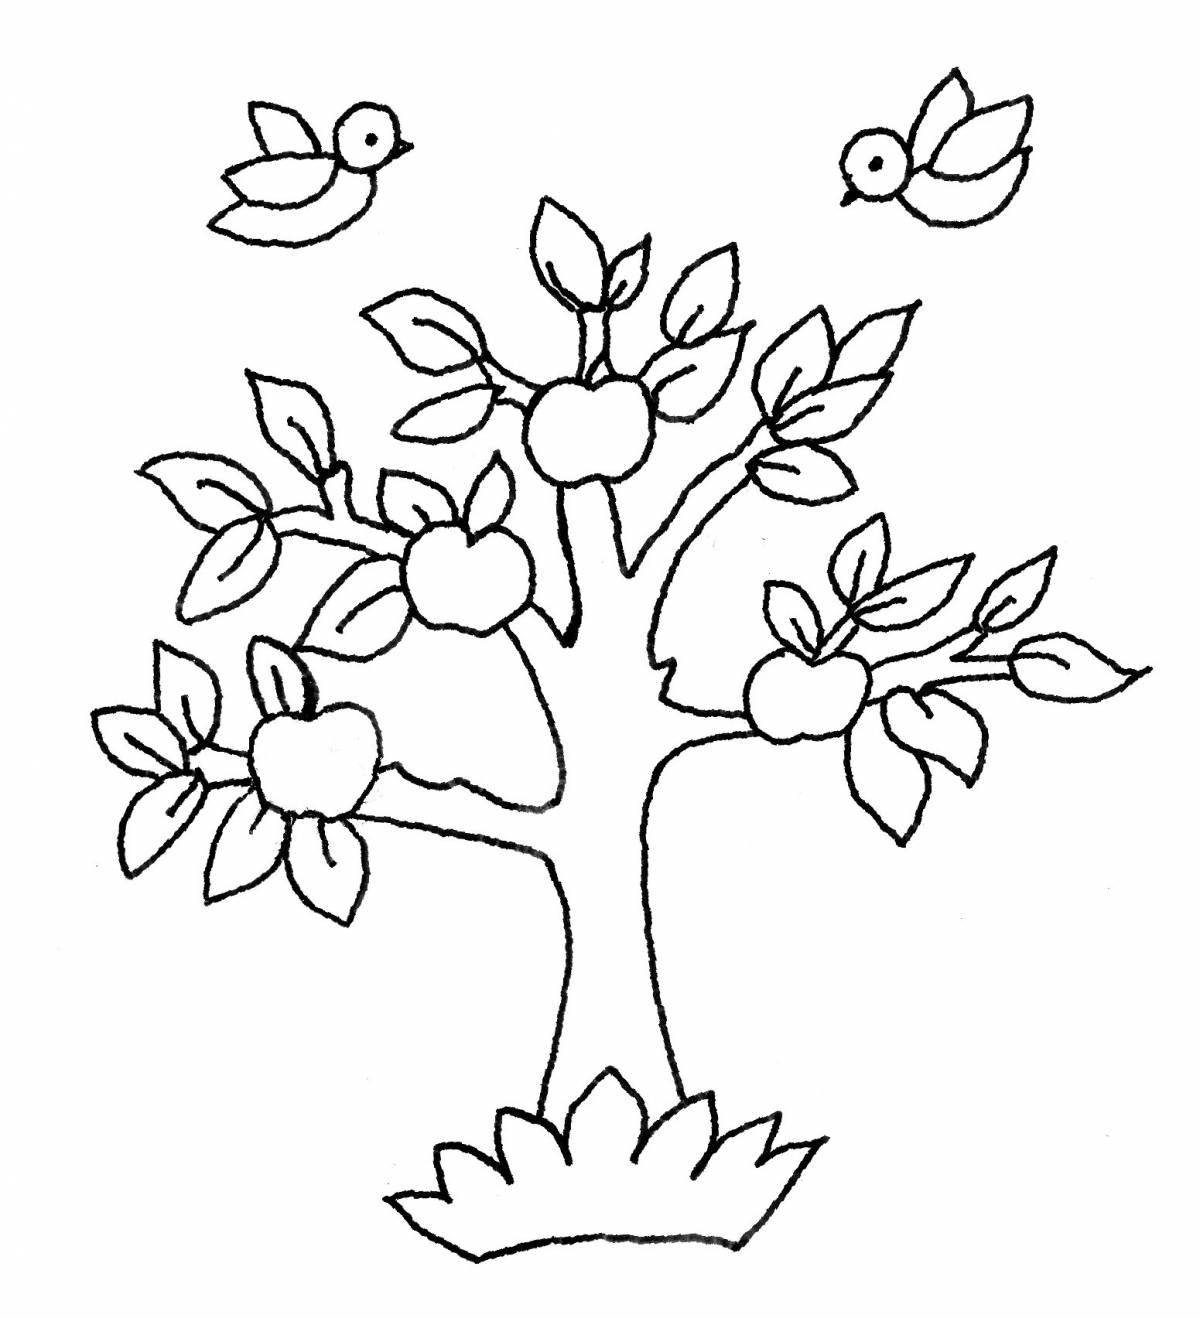 Shining apple tree with apples for preschoolers